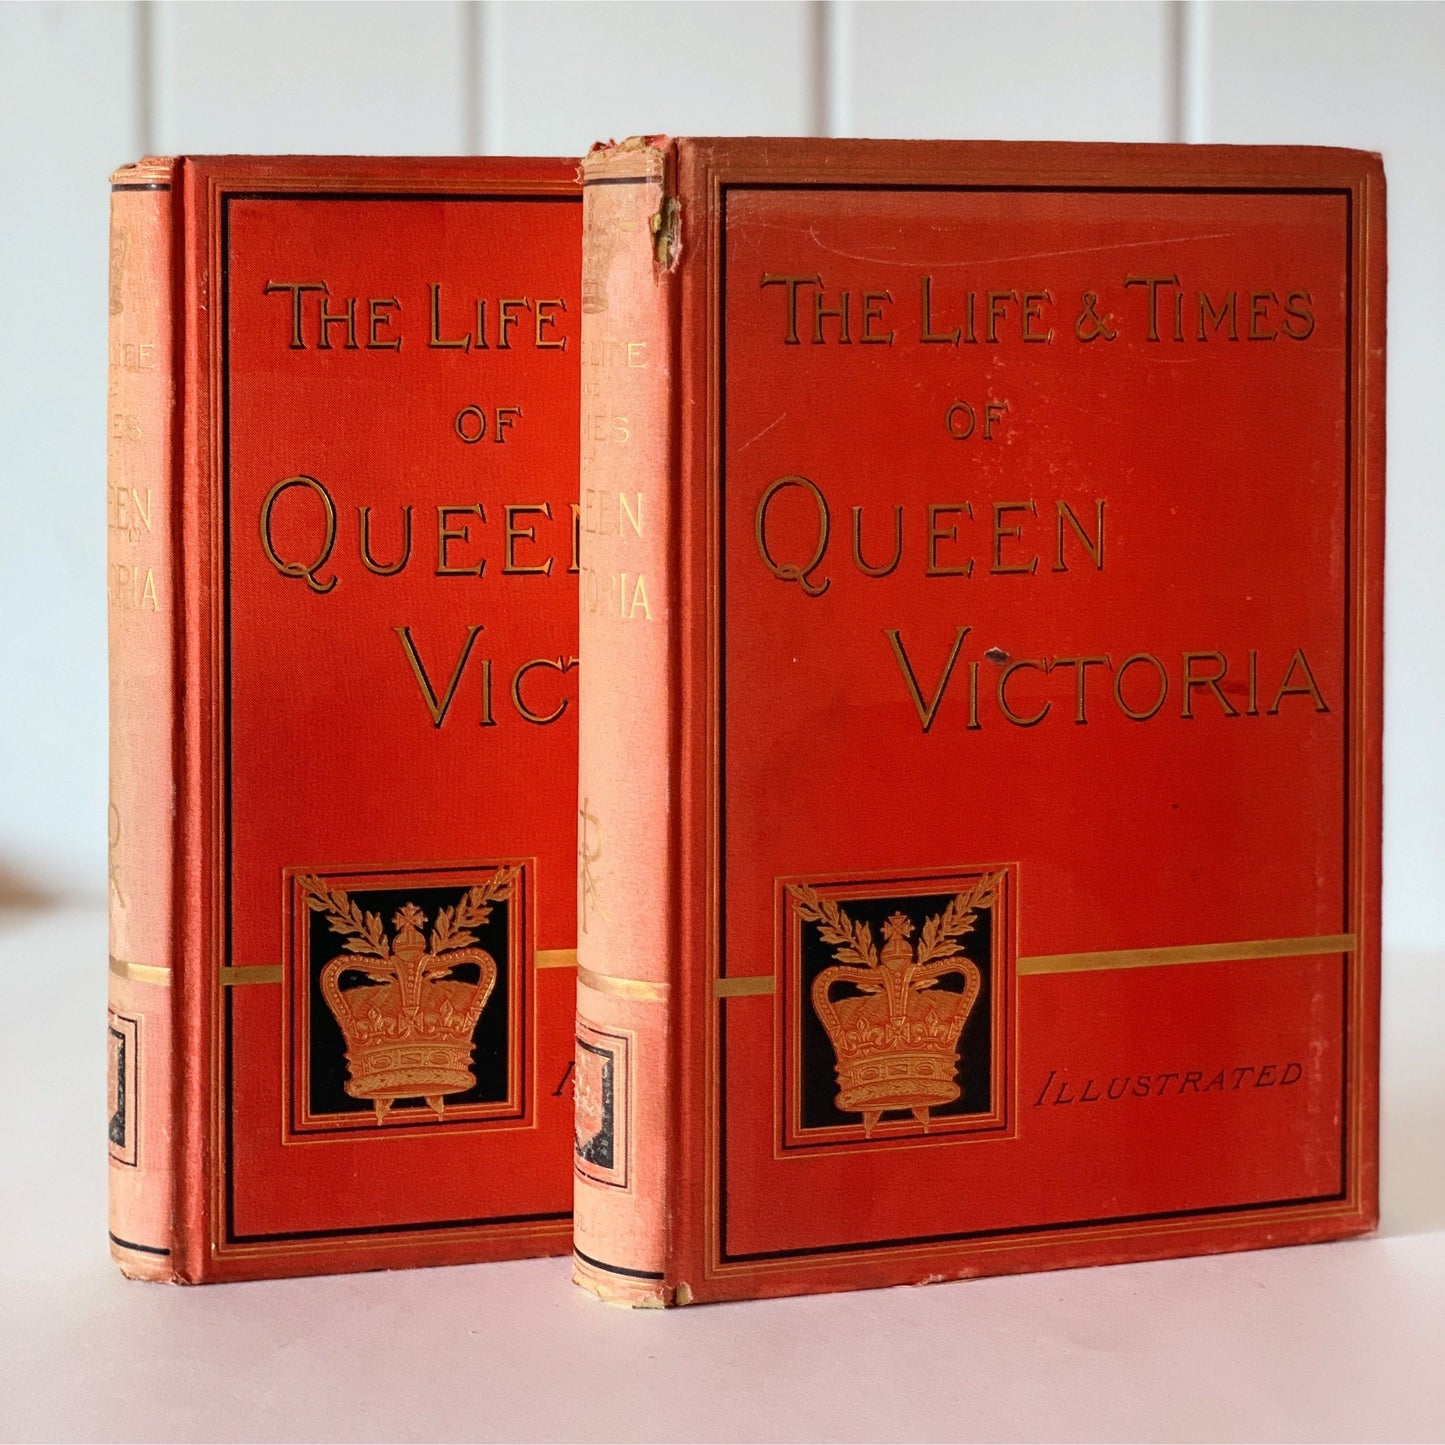 The Life and Times of Queen Victoria, 1888 Hardcovers